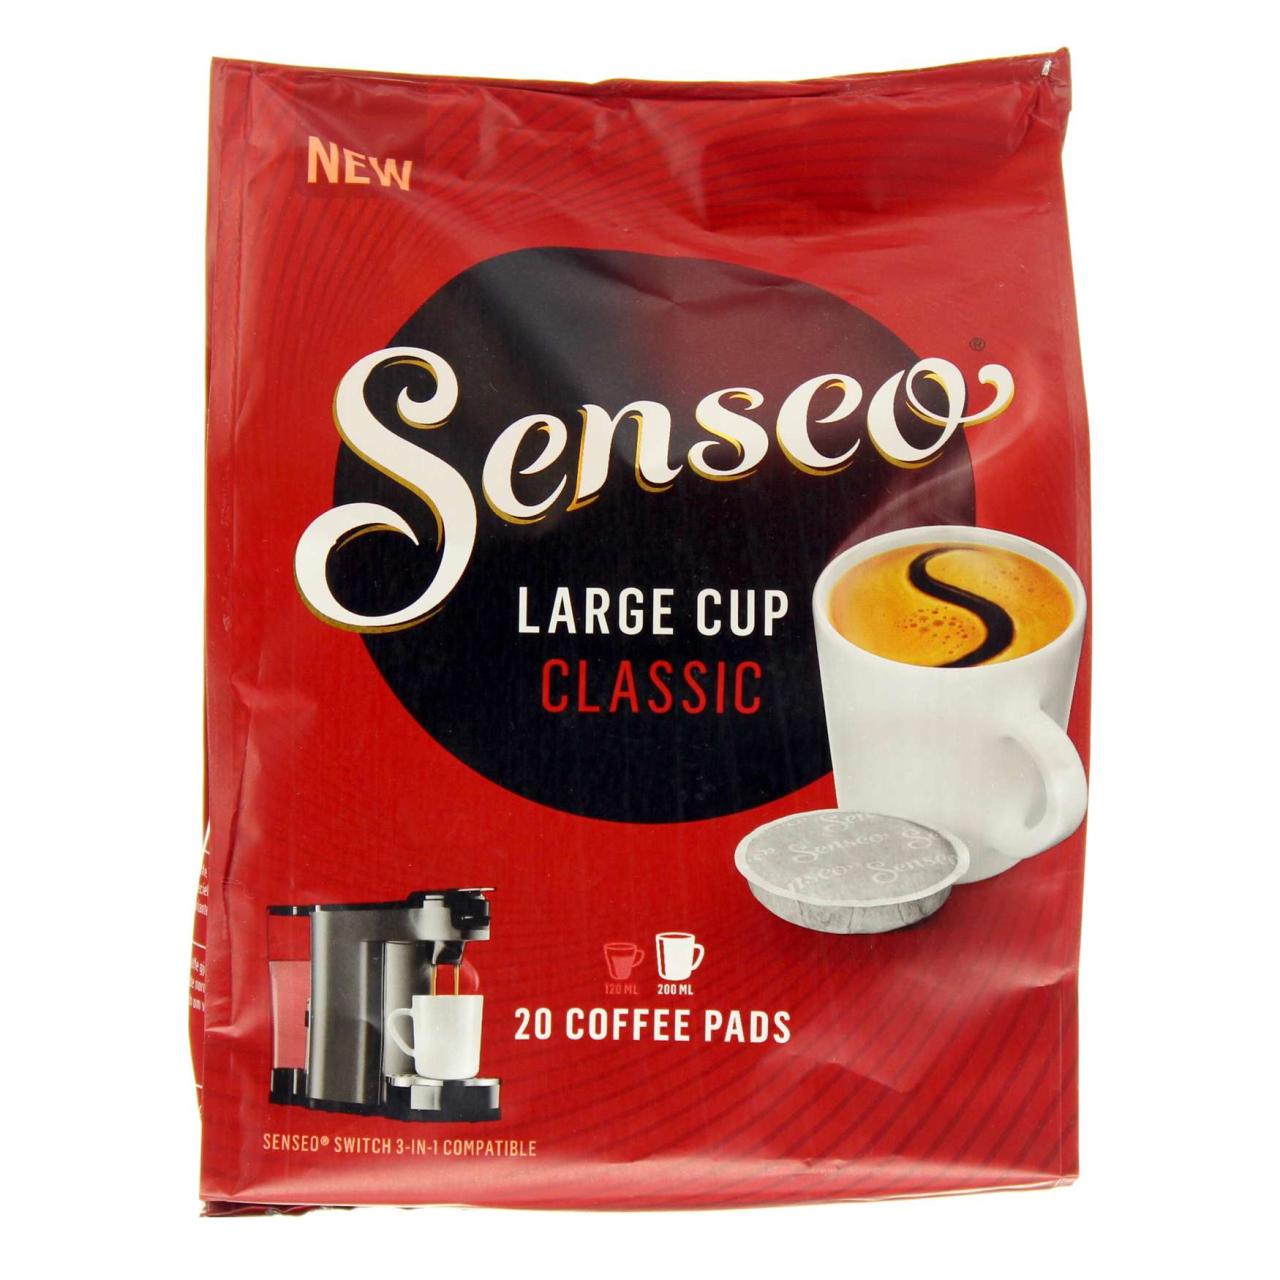 Senseo Classic 20 Pads Large Cup 268g